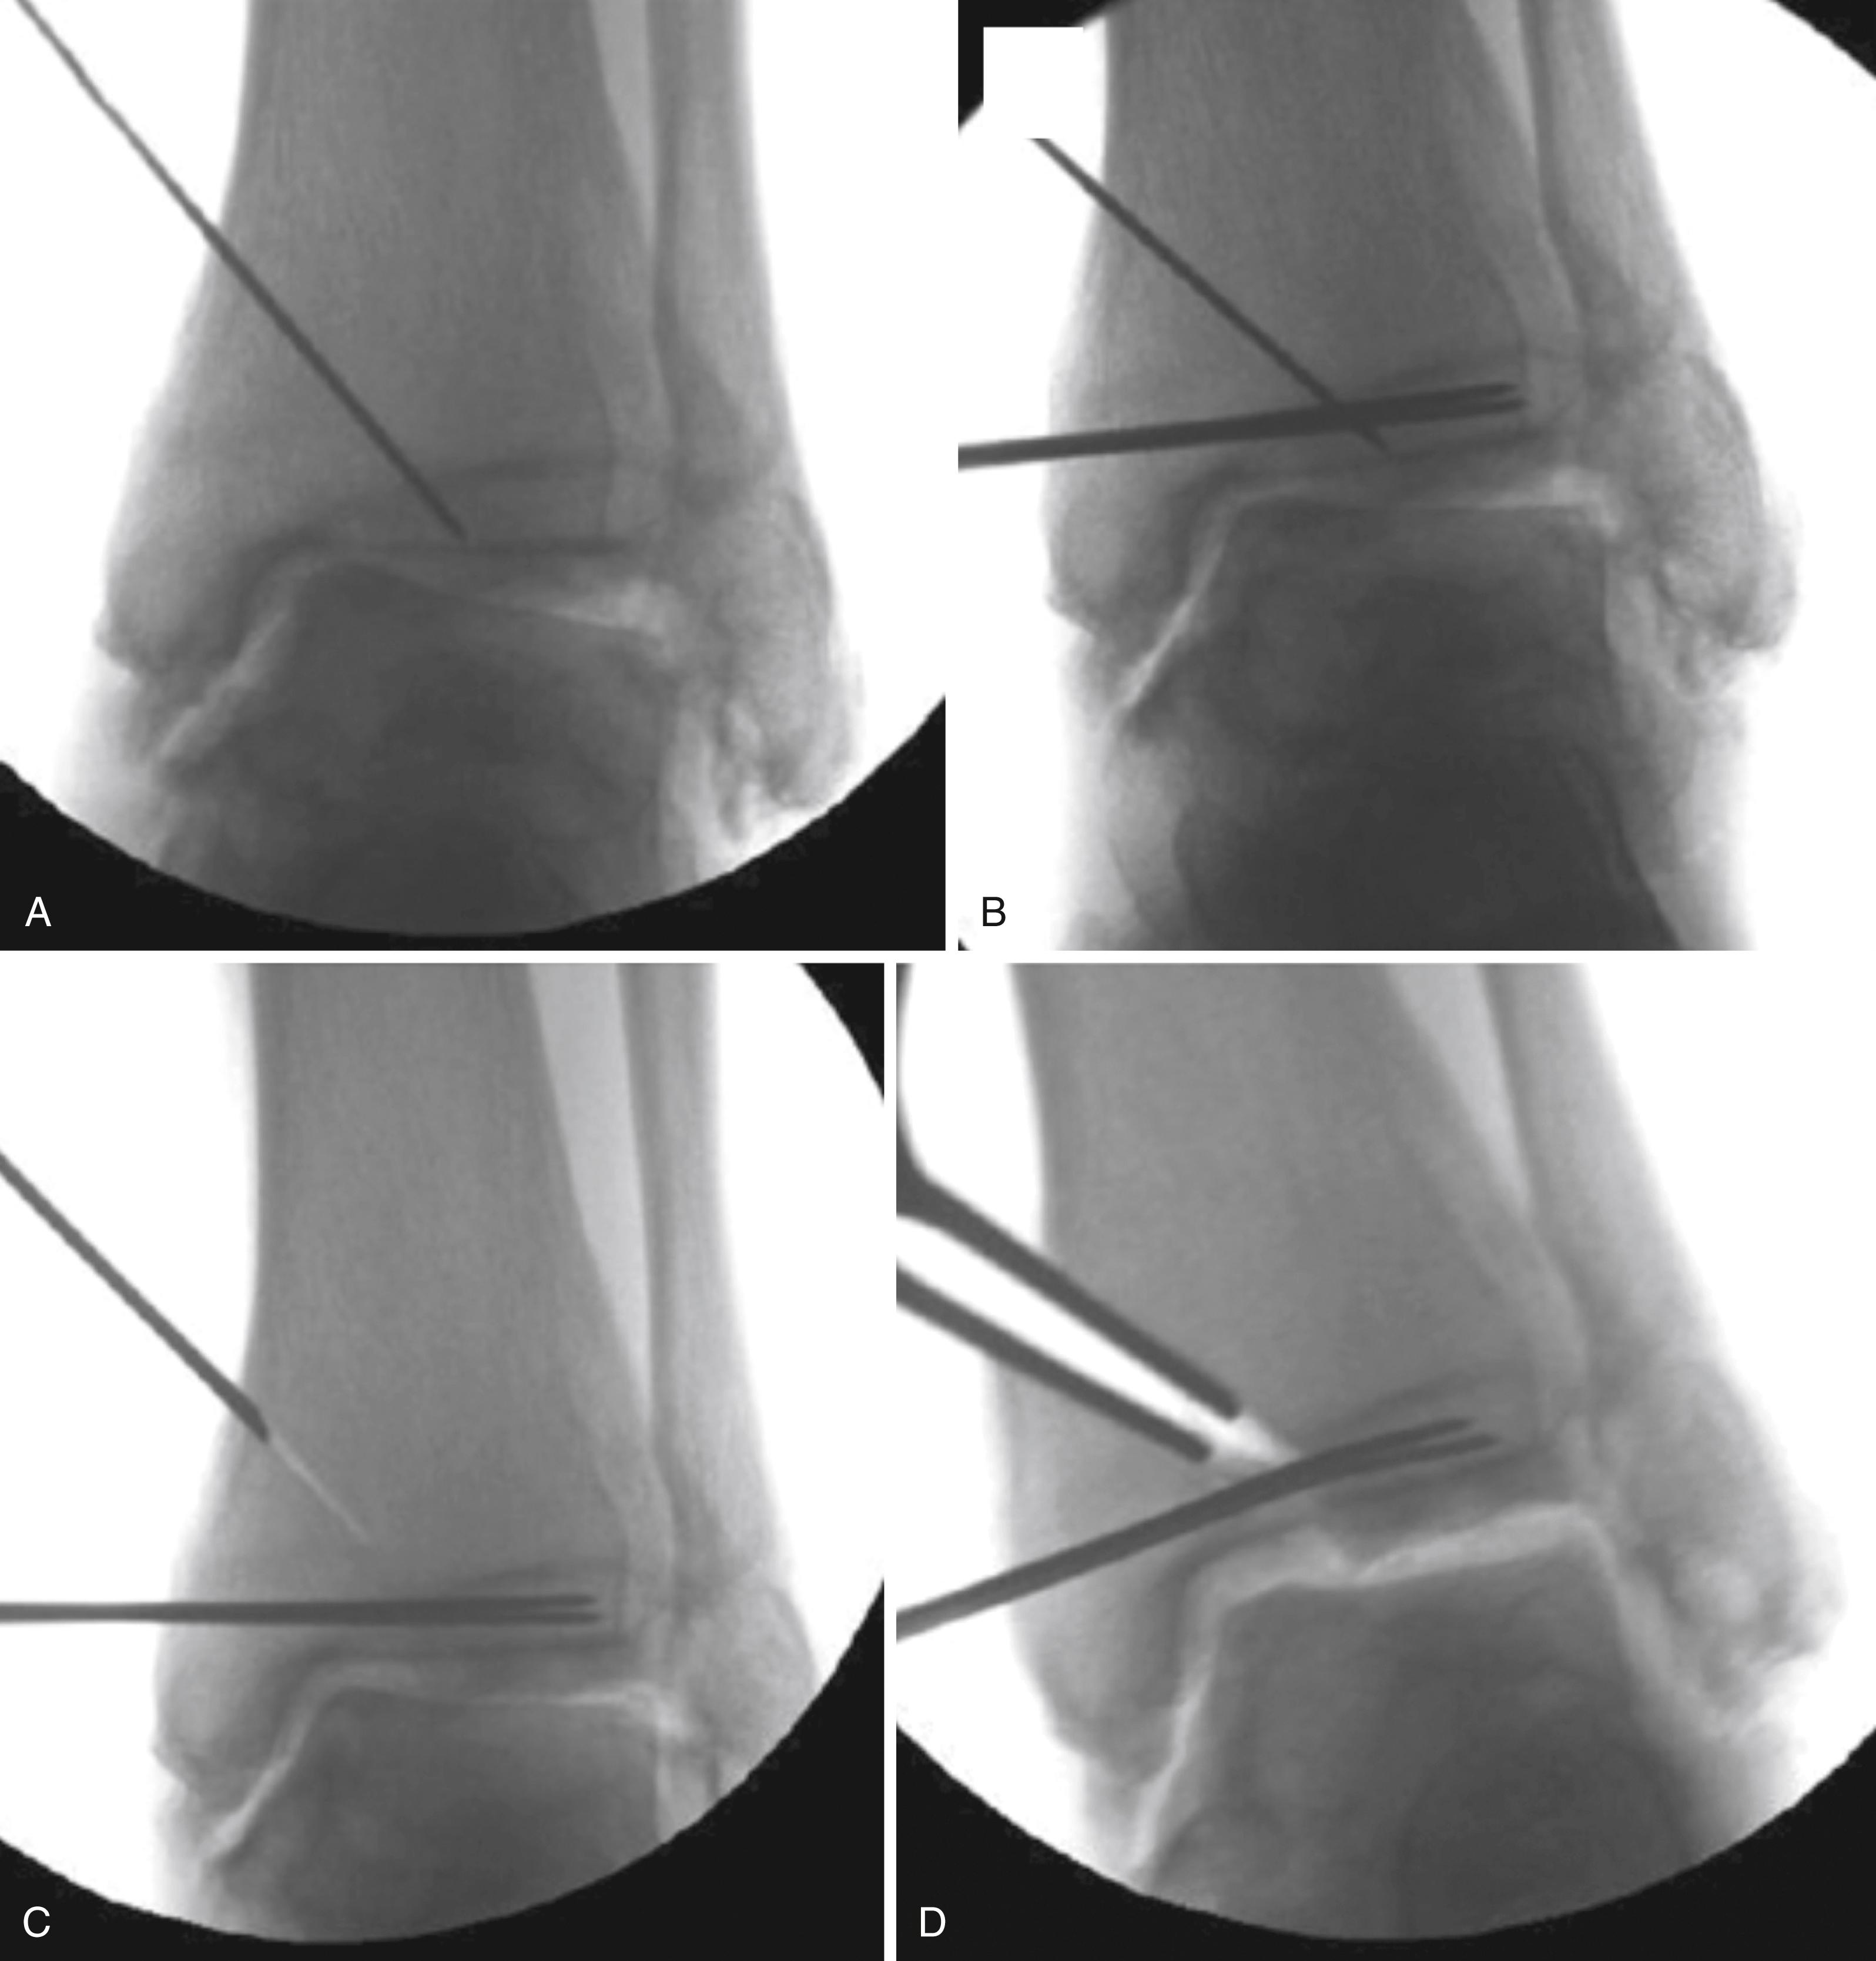 FIGURE 11.4, A , Guide pin inserted with tip positioned at the apex of the deformity. B , Kirschner wires inserted just proximal to the tibial plafond to prevent the saw from entering the joint. C , Osteotomy created with the saw aligned perpendicular to the coronal axis of the tibia. D , Displacement of the osteotomy with a lamina spreader for deformity correction.